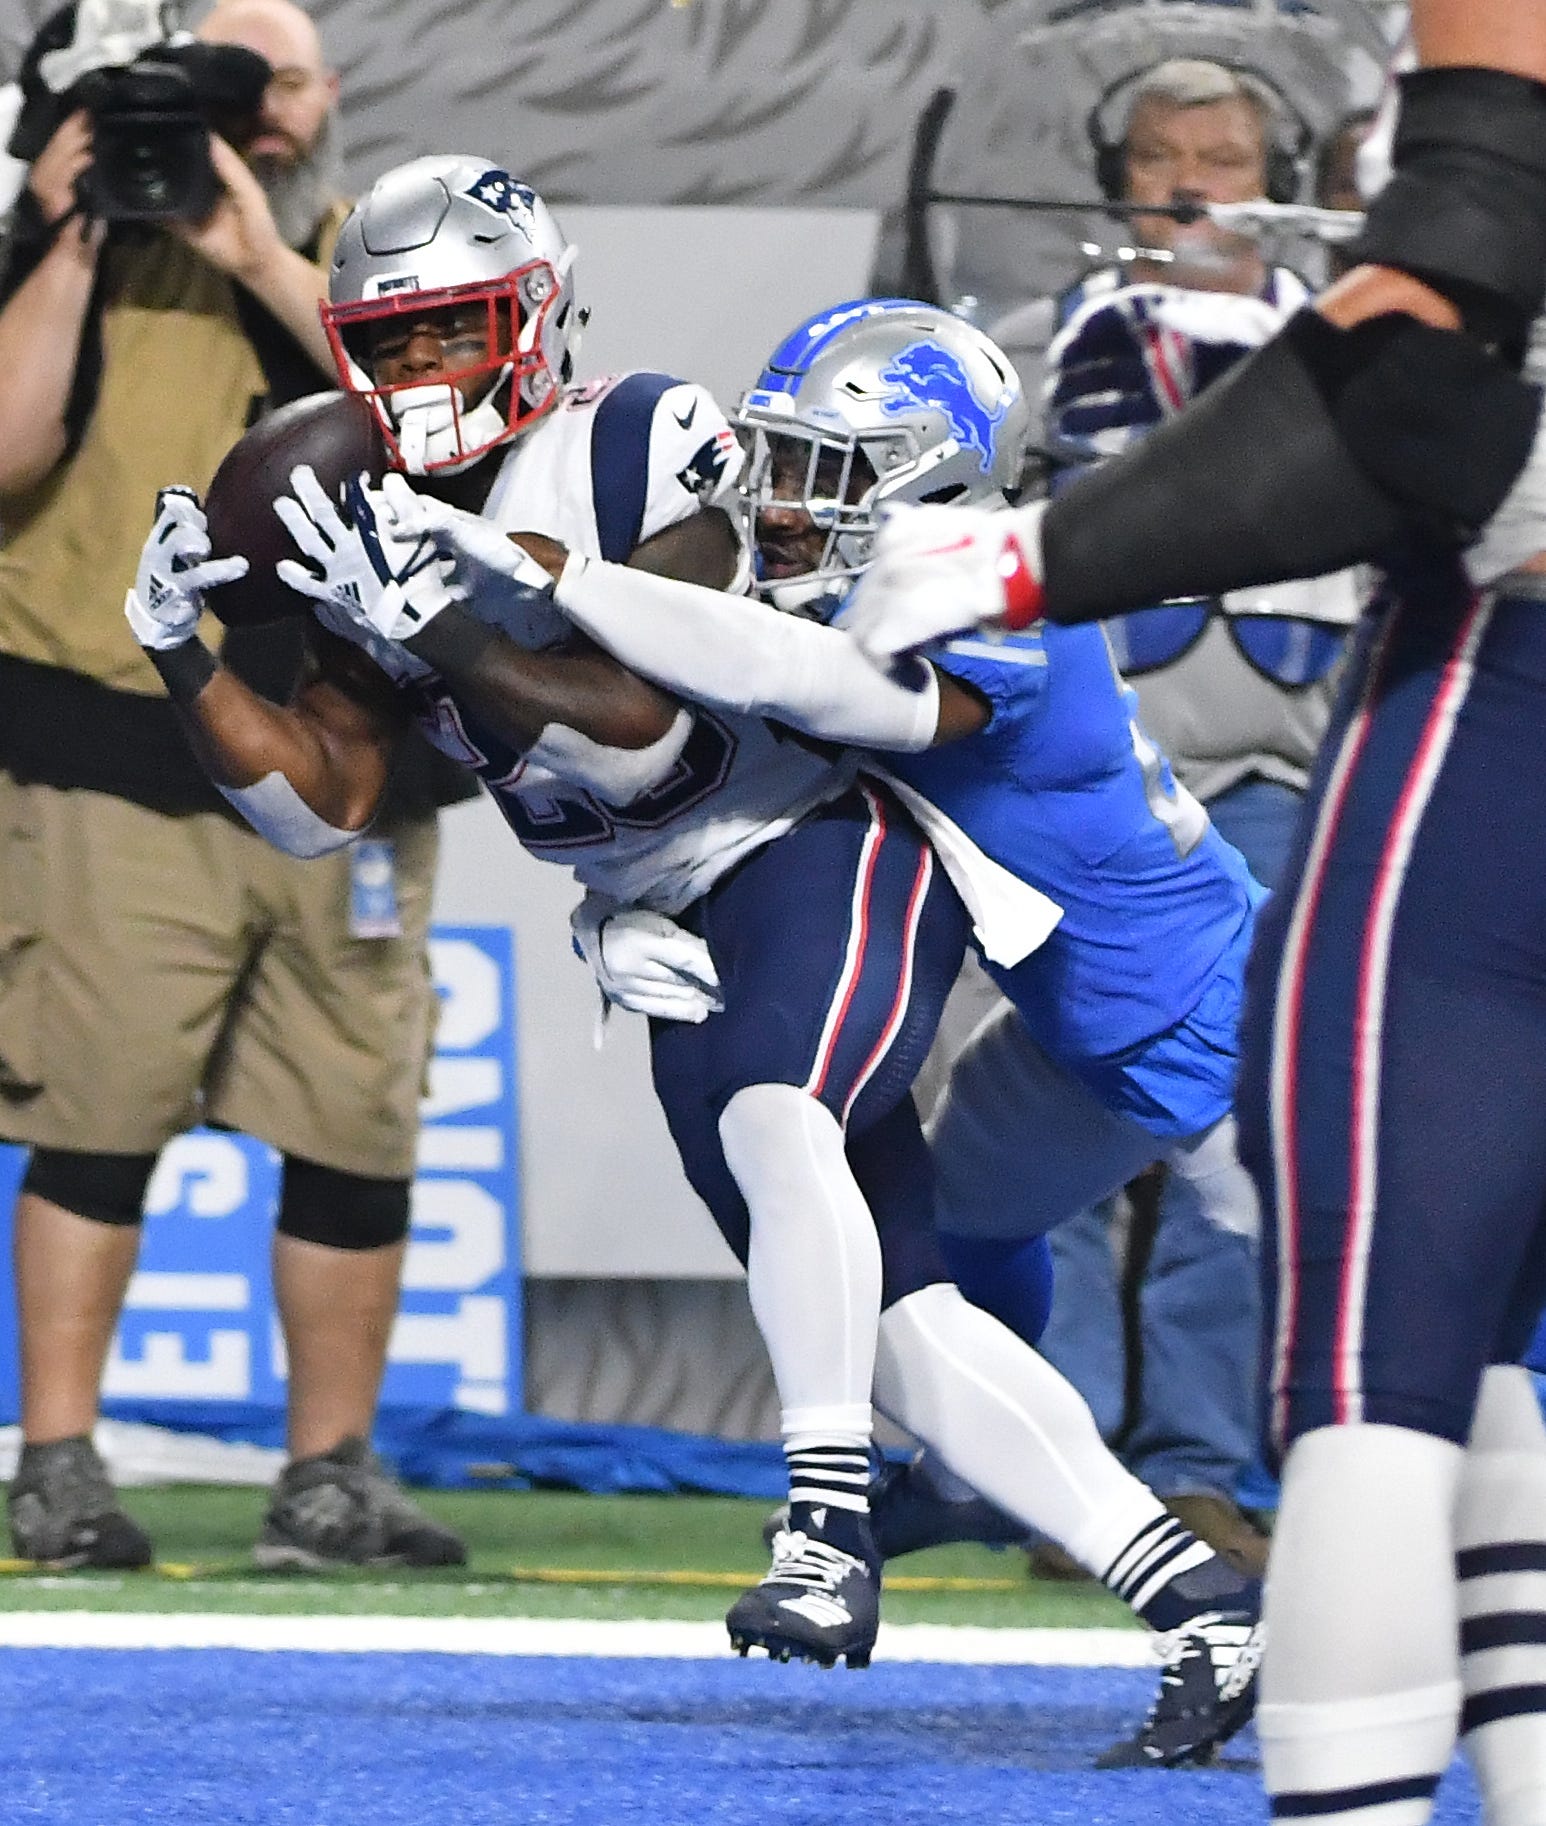 Patriots running back James White pulls in a touchdown reception past Lions ' Quandre Diggs in the third quarter.